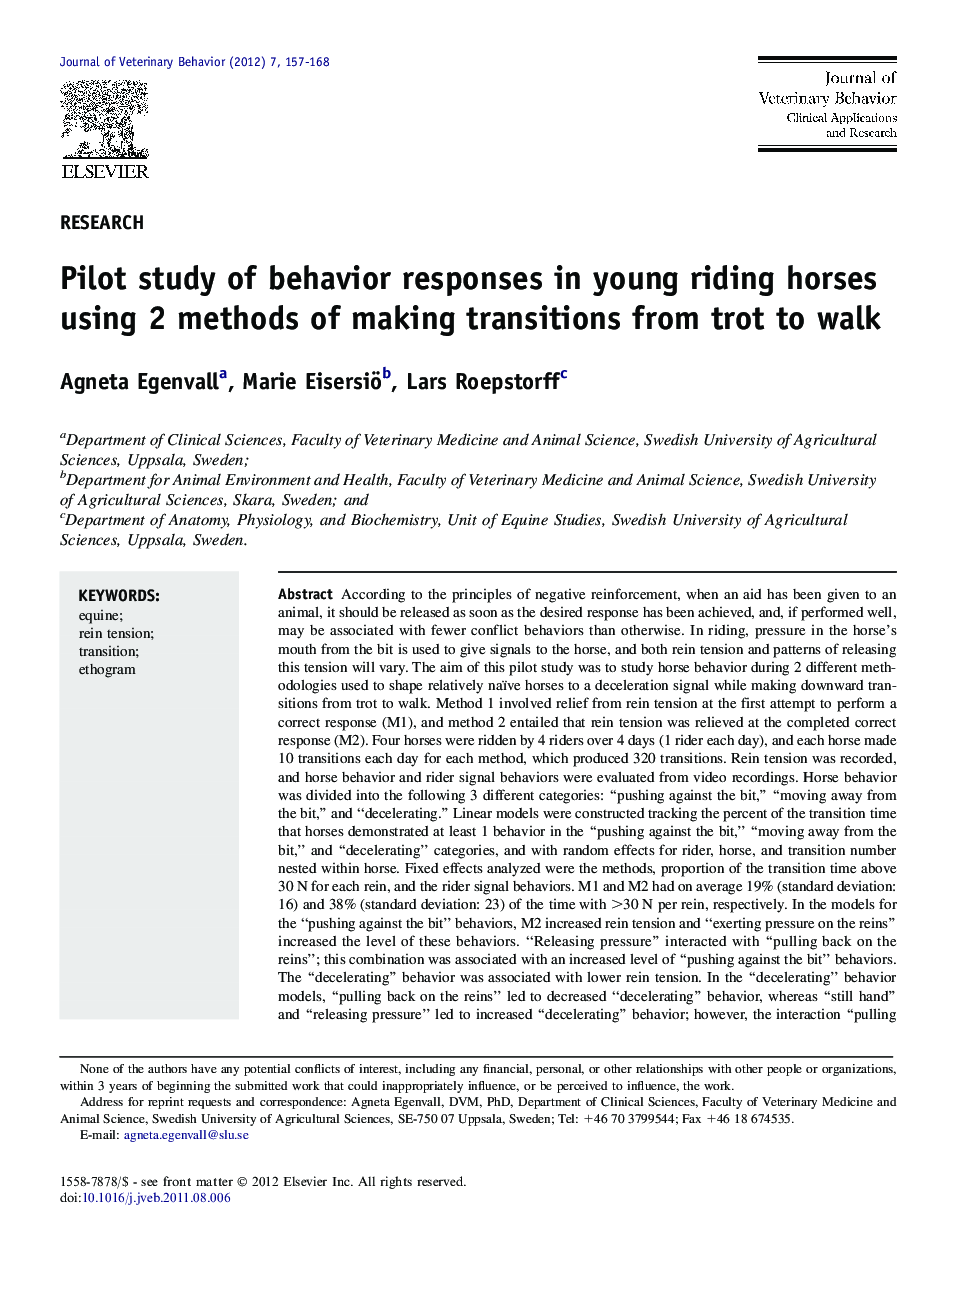 Pilot study of behavior responses in young riding horses using 2 methods of making transitions from trot to walk 